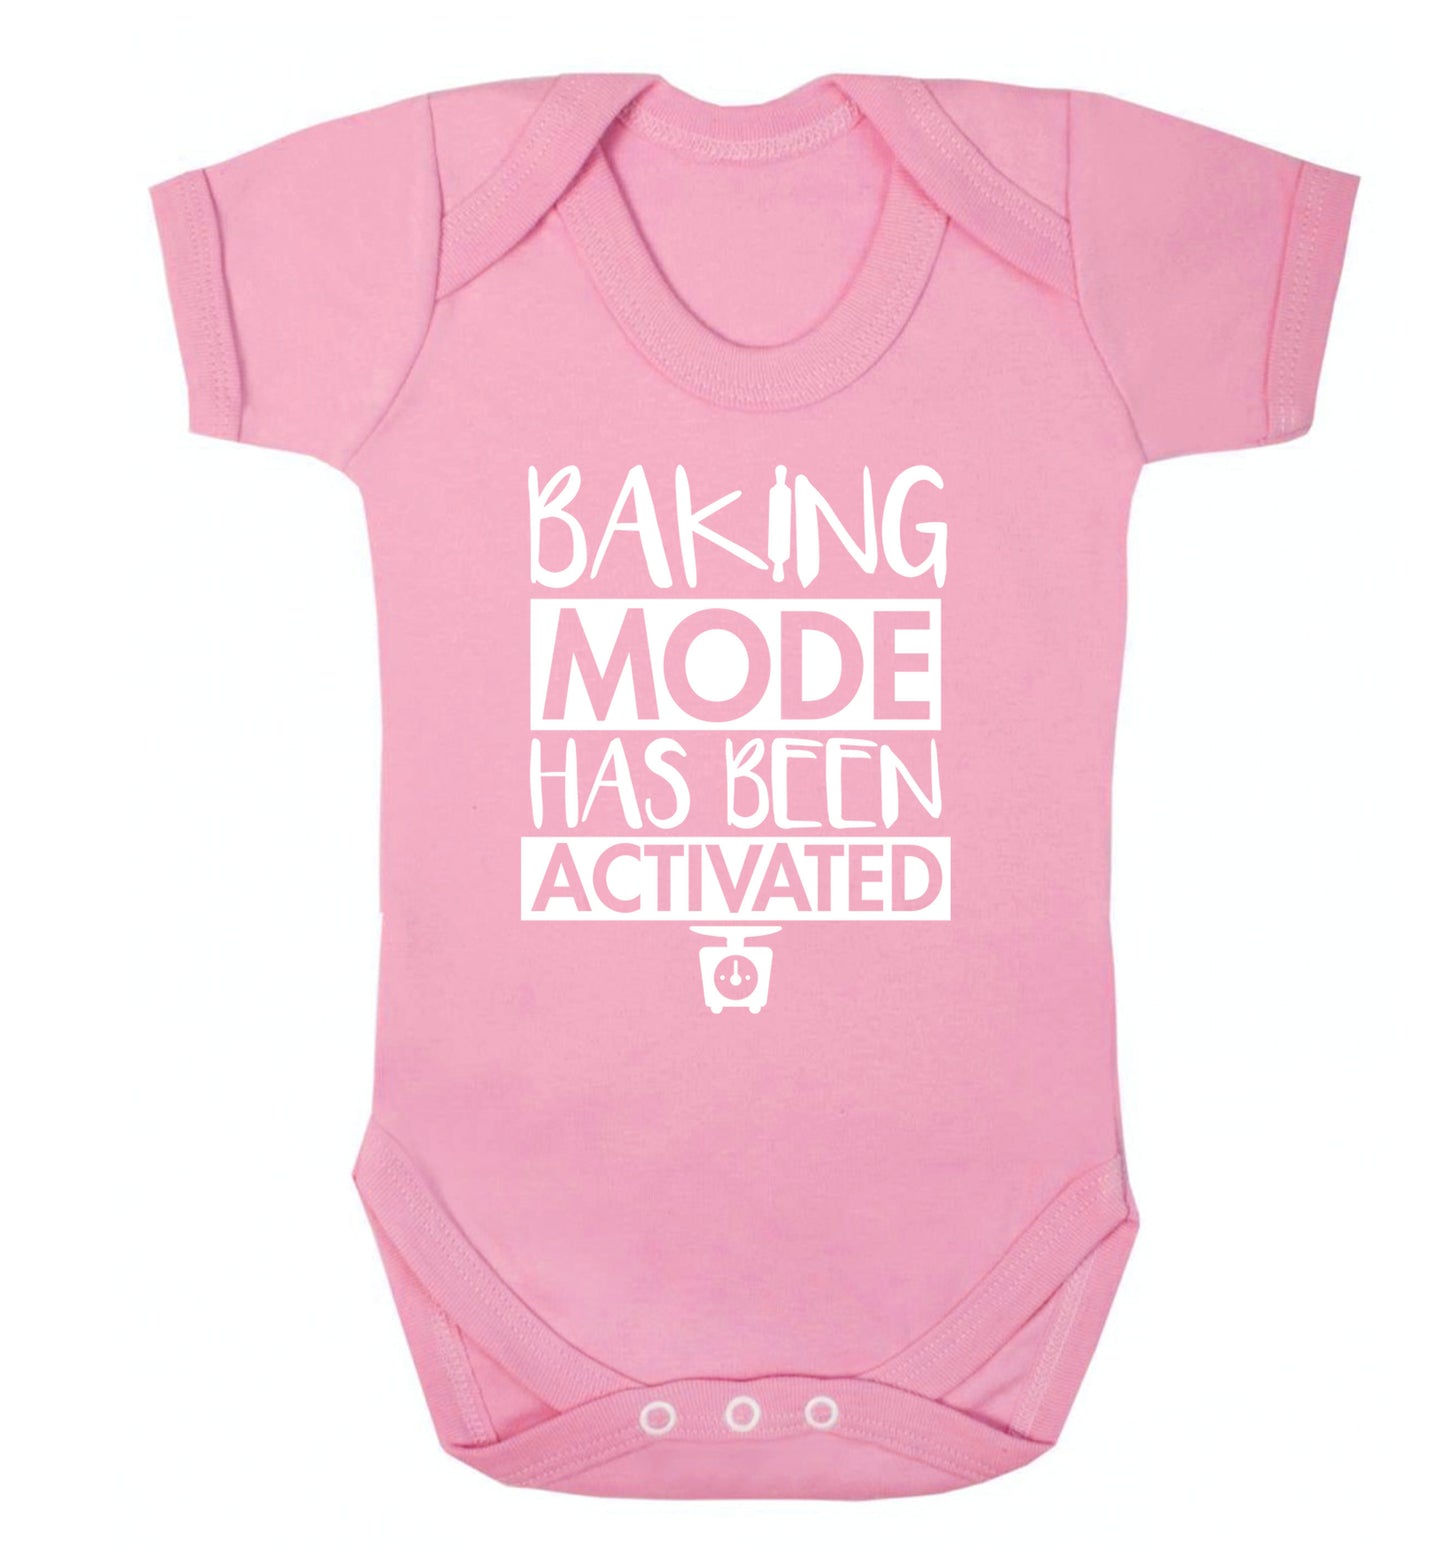 Baking mode has been activated Baby Vest pale pink 18-24 months